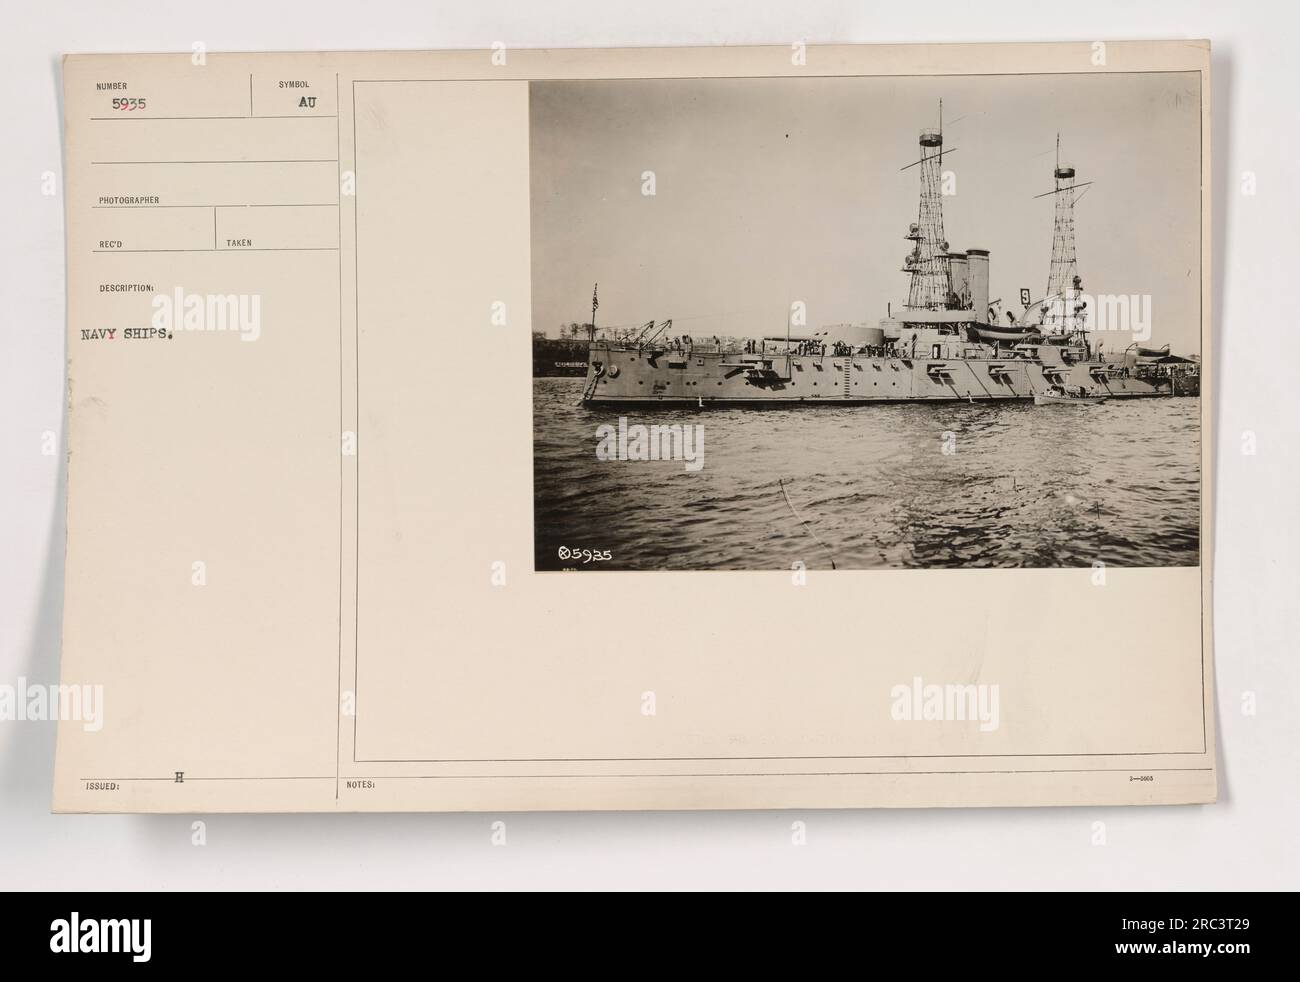 The USS Alabama during the 1910s is seen in this photograph. This image, labeled 111-SC-5935, was captured by photographer Reed. The USS Alabama was a navy ship used during World War I. It was an important vessel in American military activities during that time period. Stock Photo